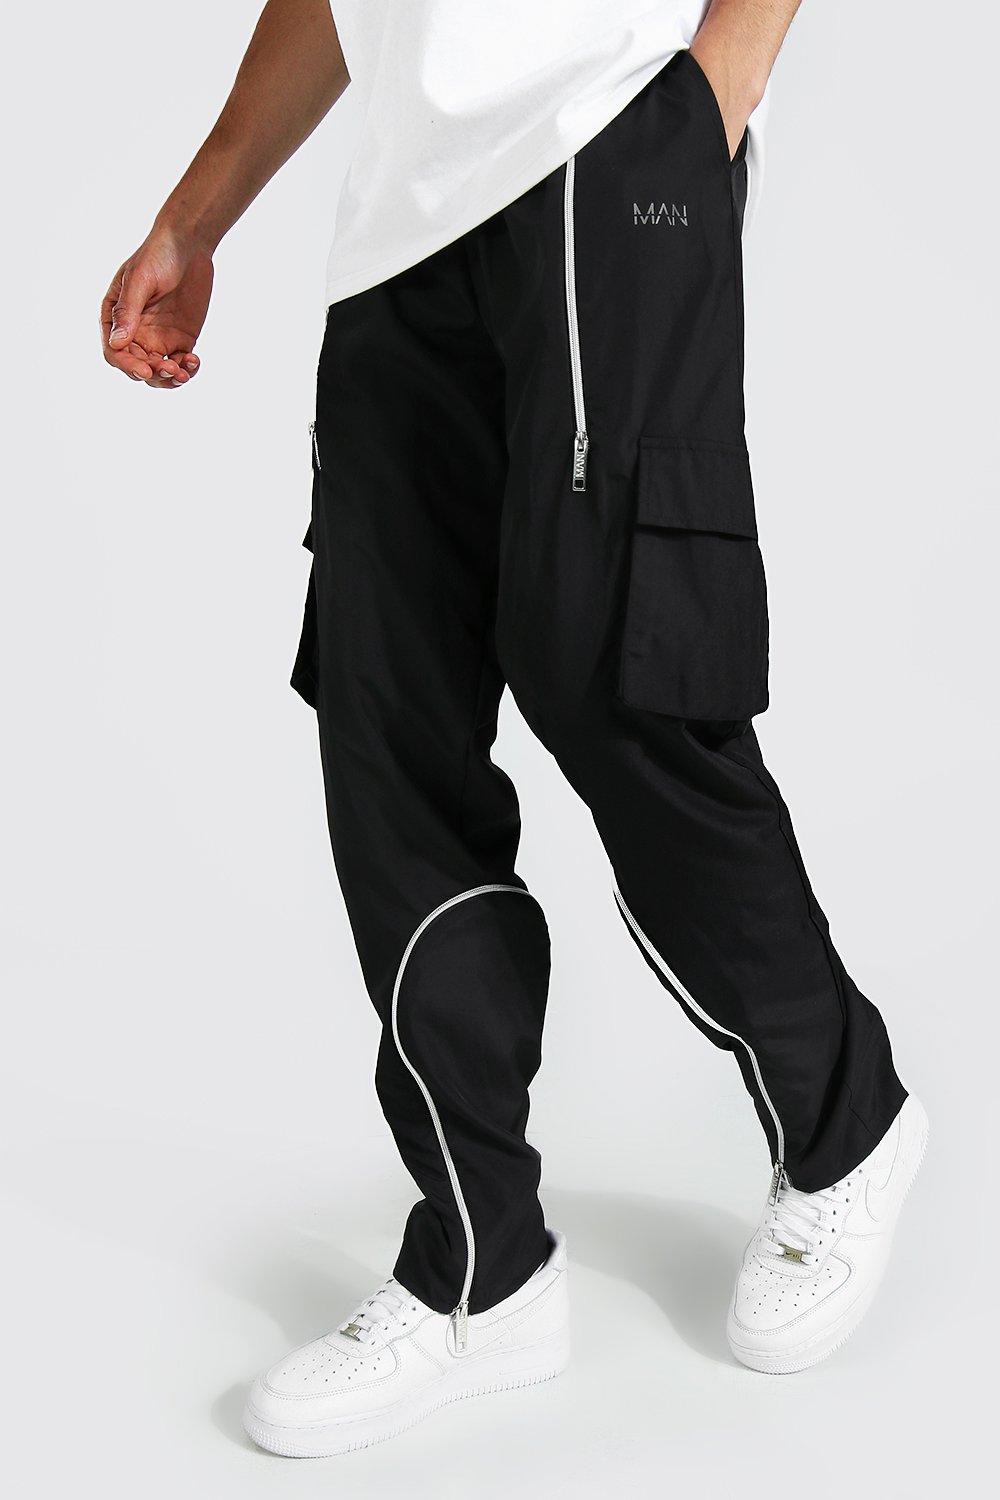 Mens Tall Cargo Pants | vlr.eng.br